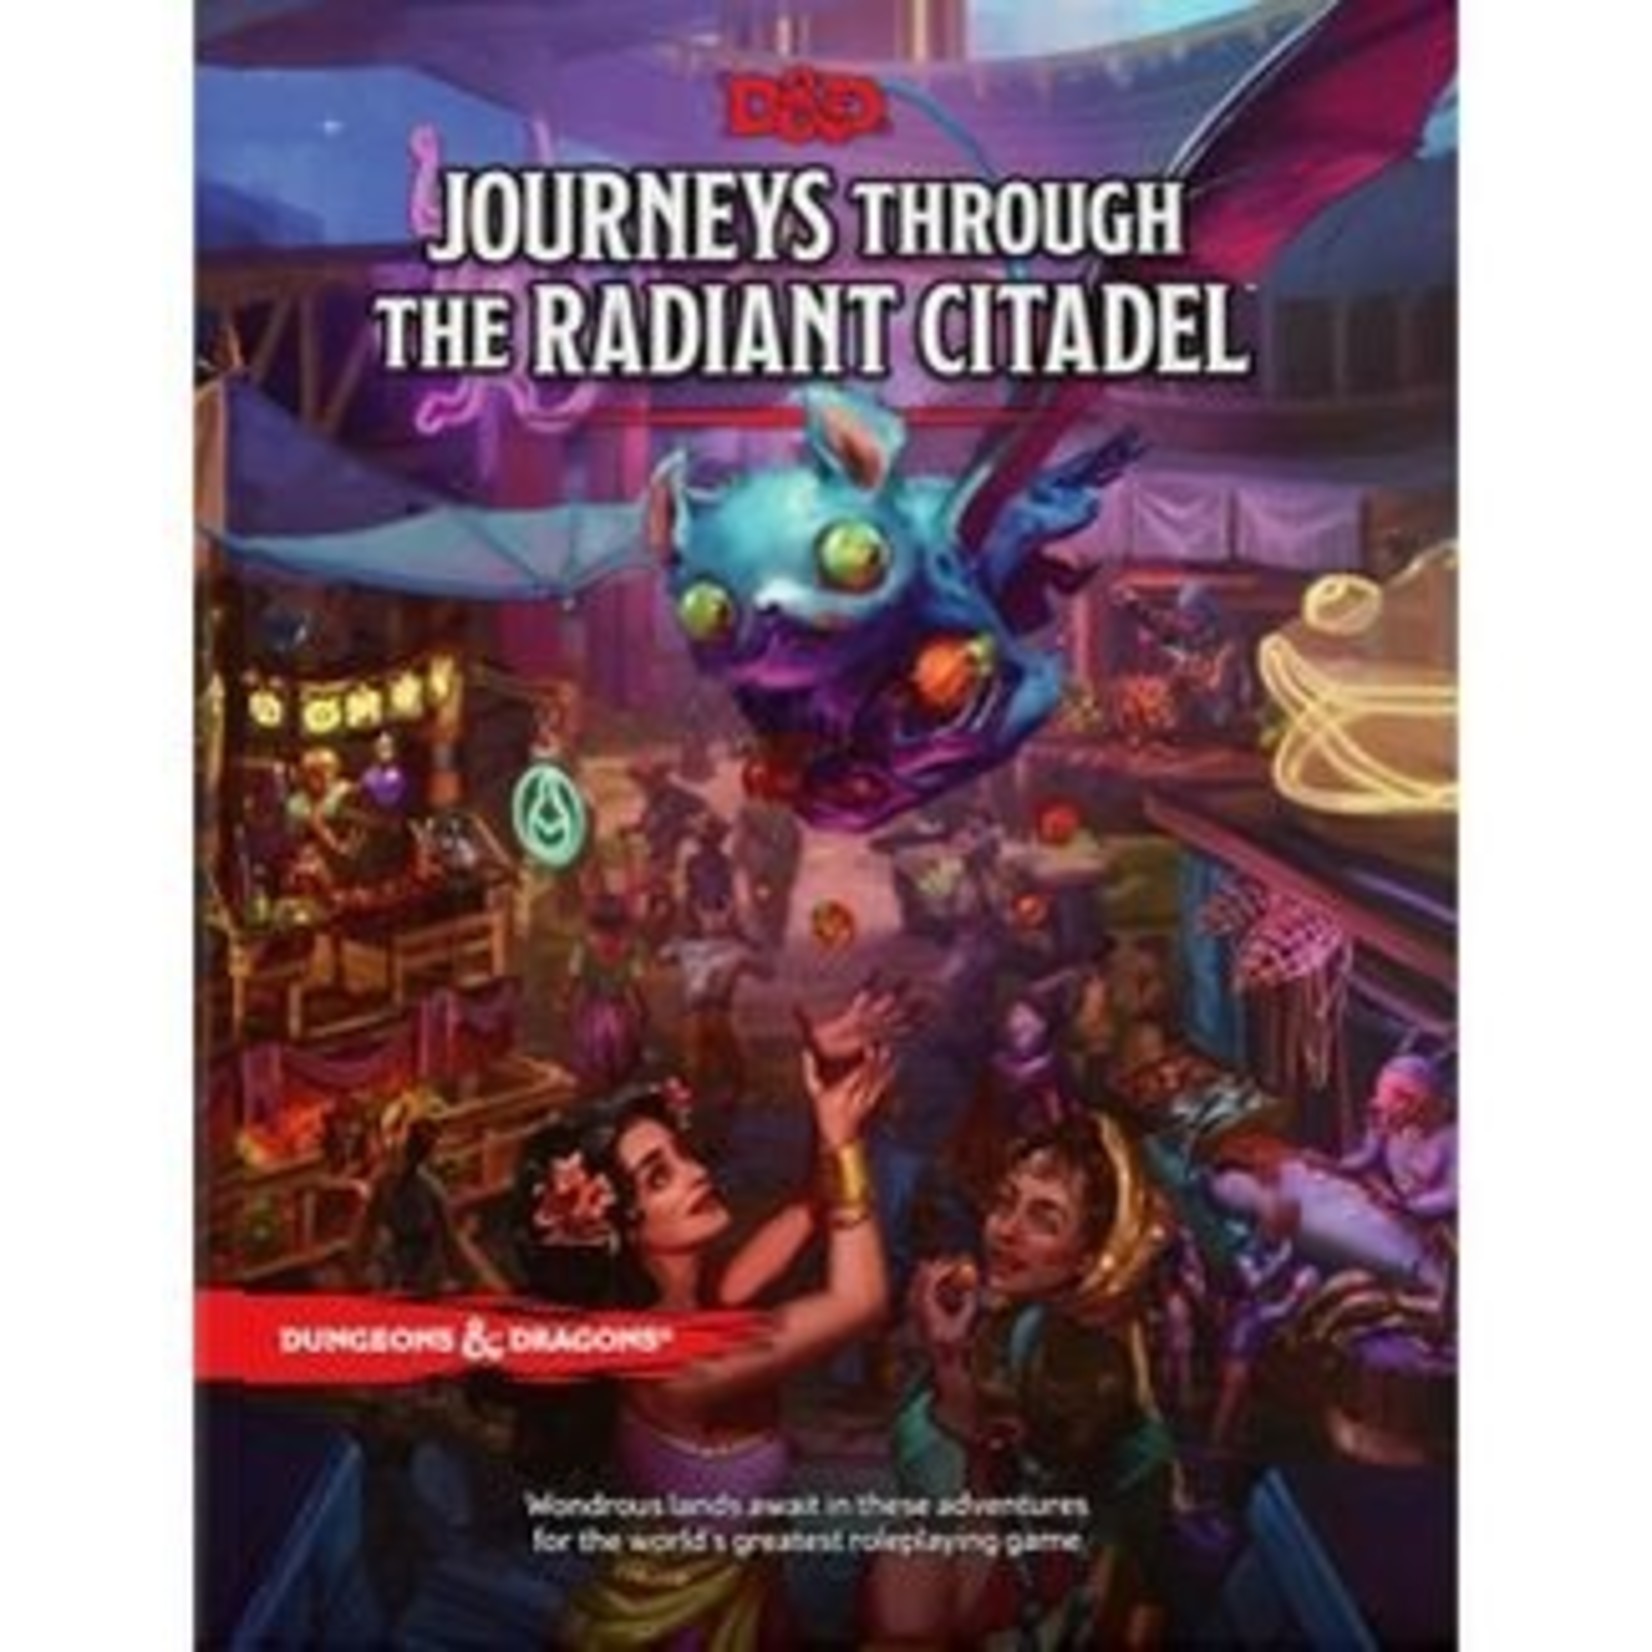 Alliance Game Distributors Dungeons & Dragons RPG: Journeys Through the Radiant Citadel Hard Cover